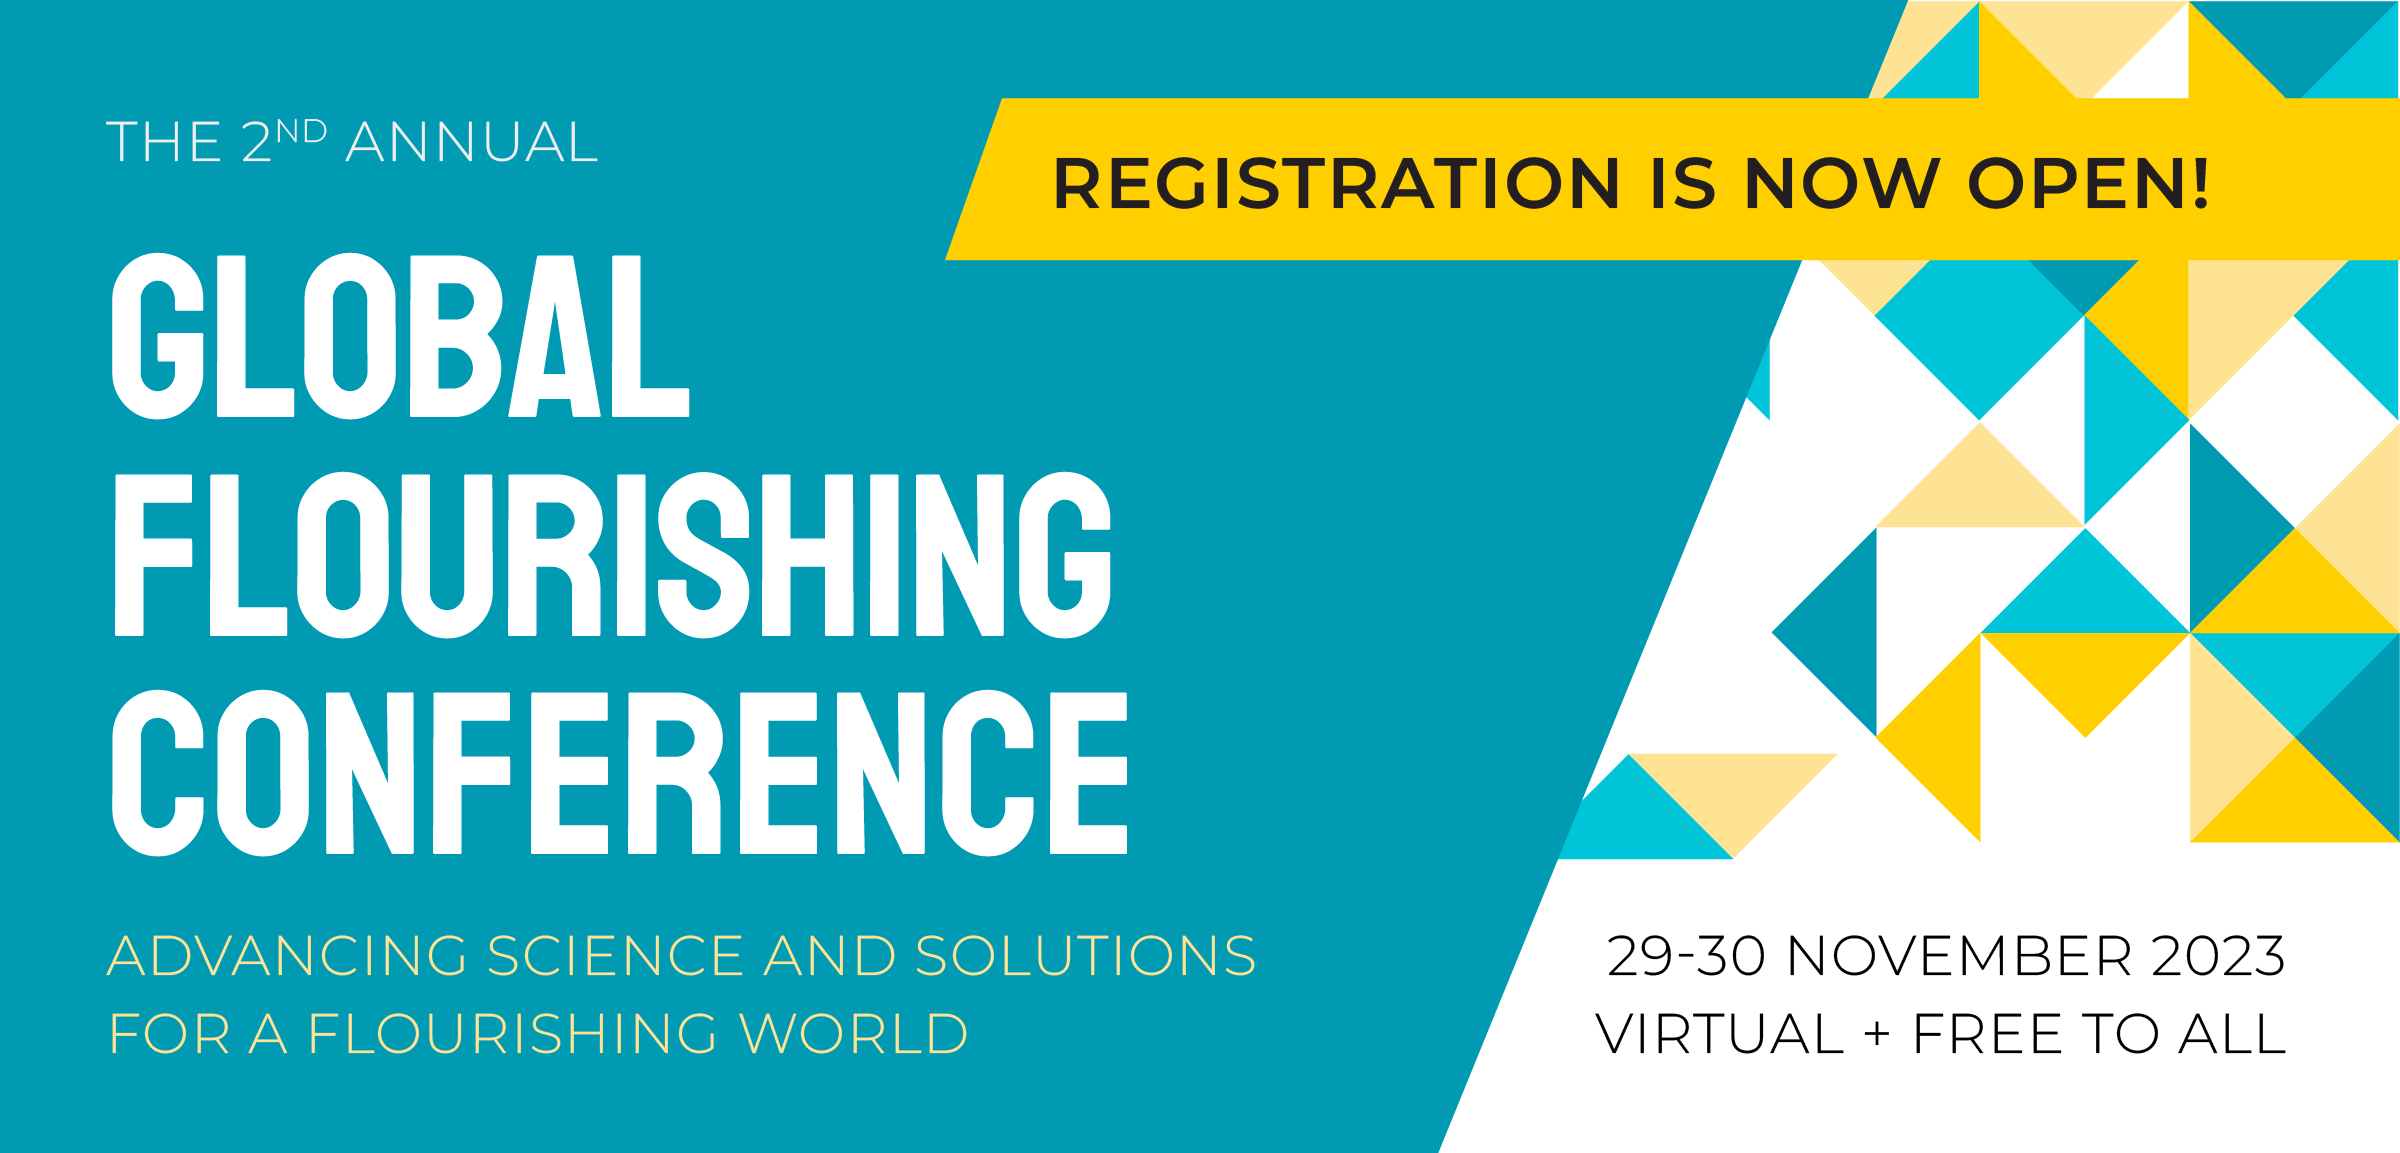 Second Annual Human Flourishing Conference November 29 & 30 2023 - Virtual & Free of Cost - Sign up at HumanFlourishing.org